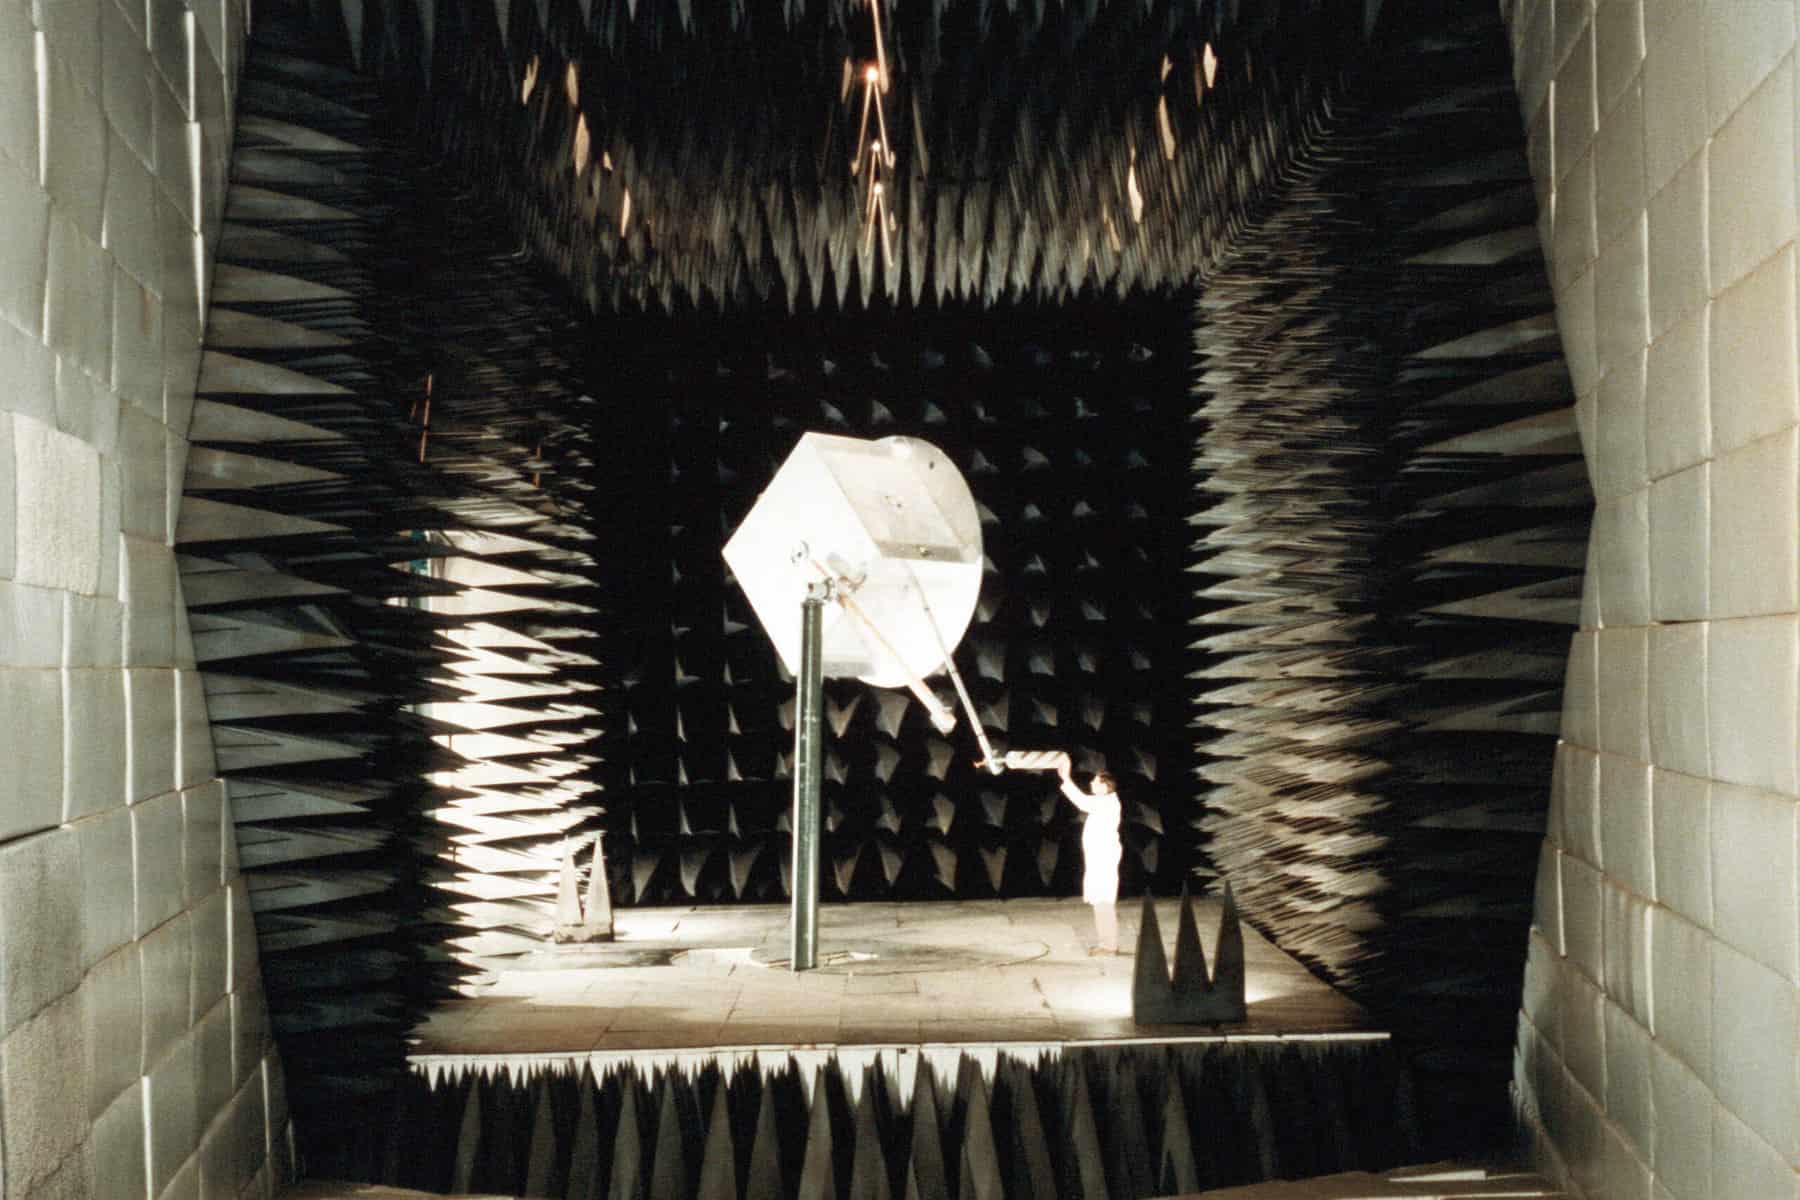 Fred Domer makes an adjustment to the position of a unit before it is tested in an anechoic chamber in the Payload Checkout Facility at the Naval Research Laboratory (NRL).